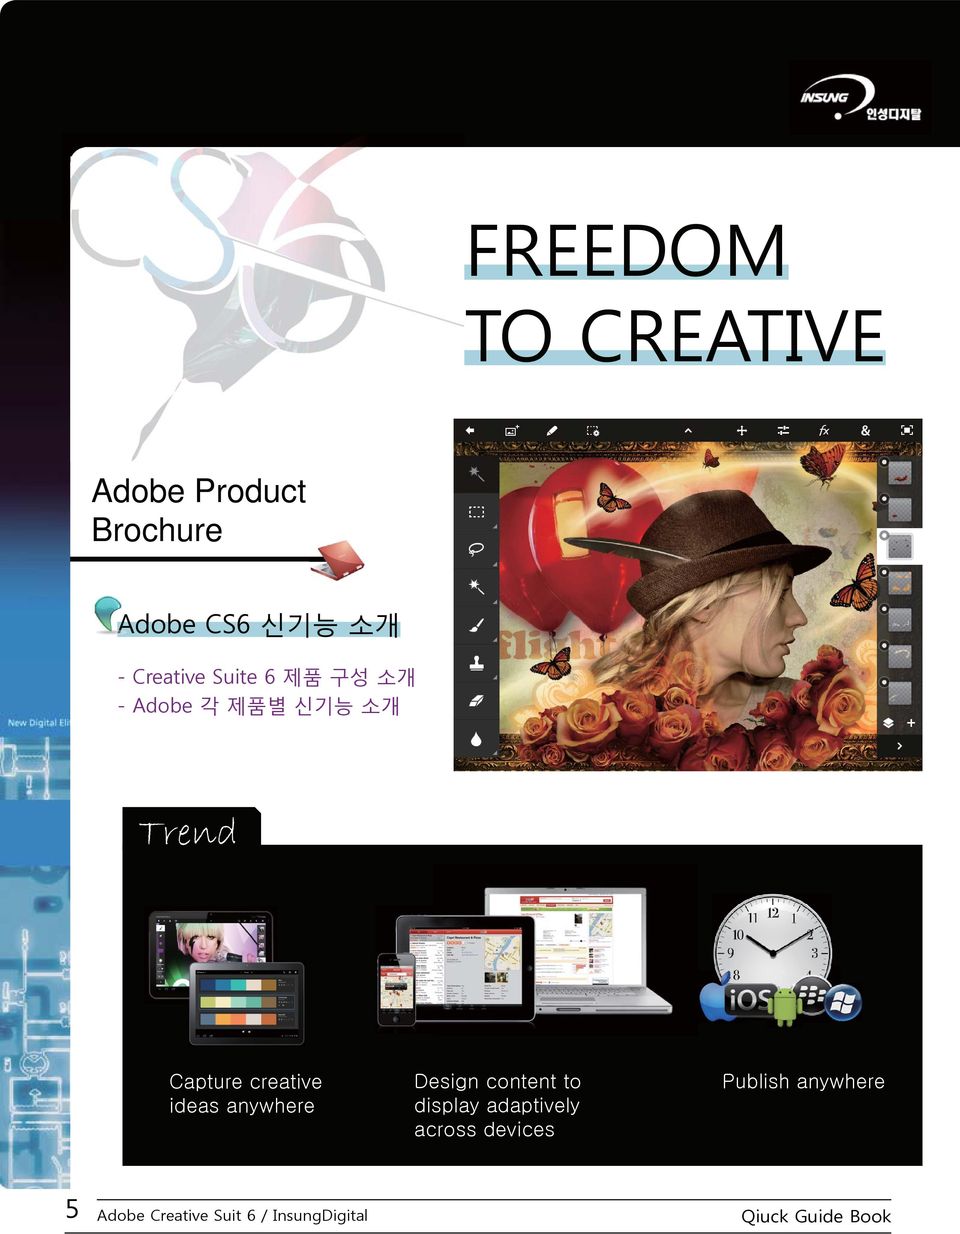 creative ideas anywhere Design content to display adaptively across